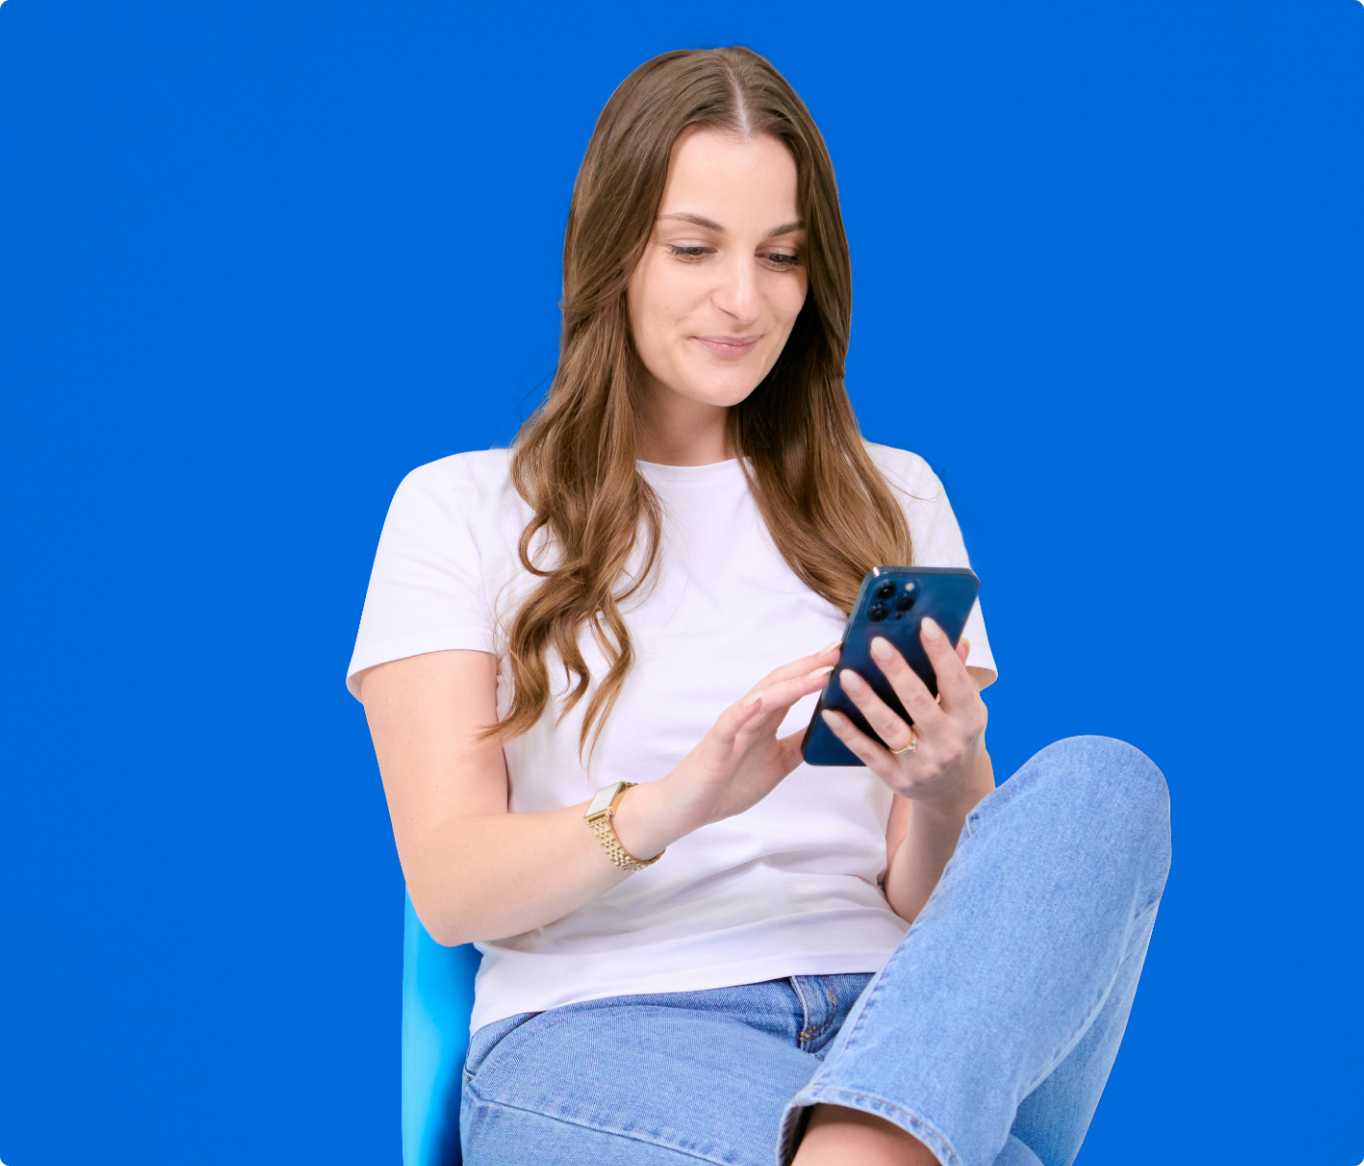 A woman sitting on a blue chair using a cell phone.